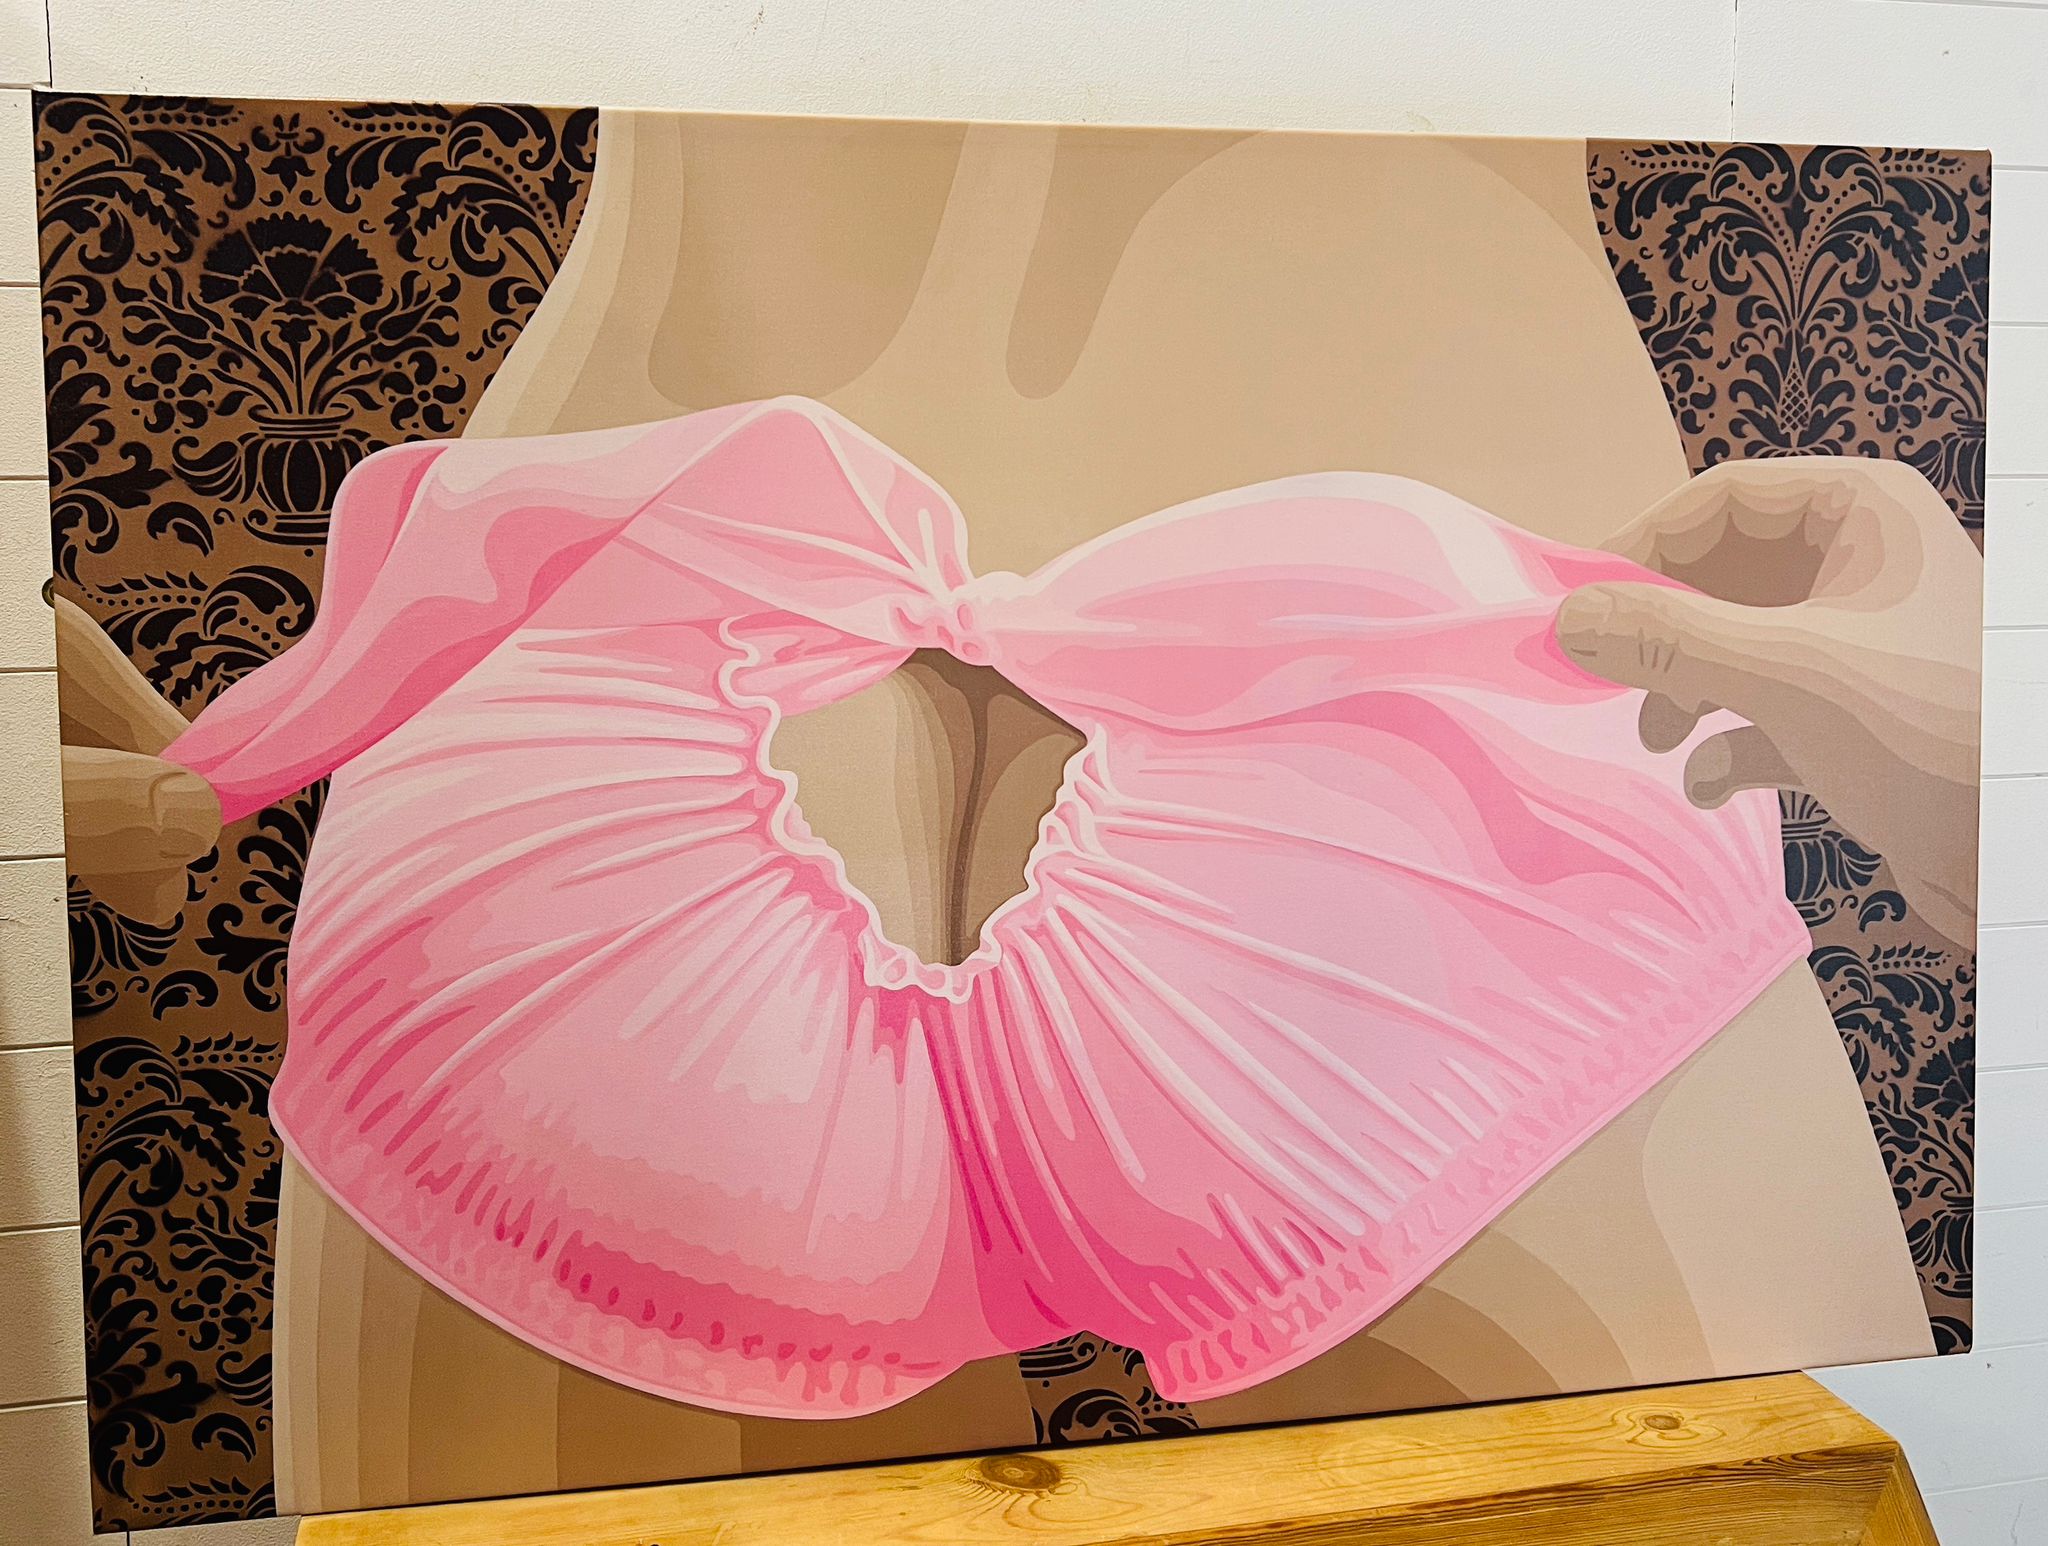 A boxed canvas "Tickled Pink" by Simon Claridge Washington Green 9/95 (78cm x 116cm) - Image 3 of 4